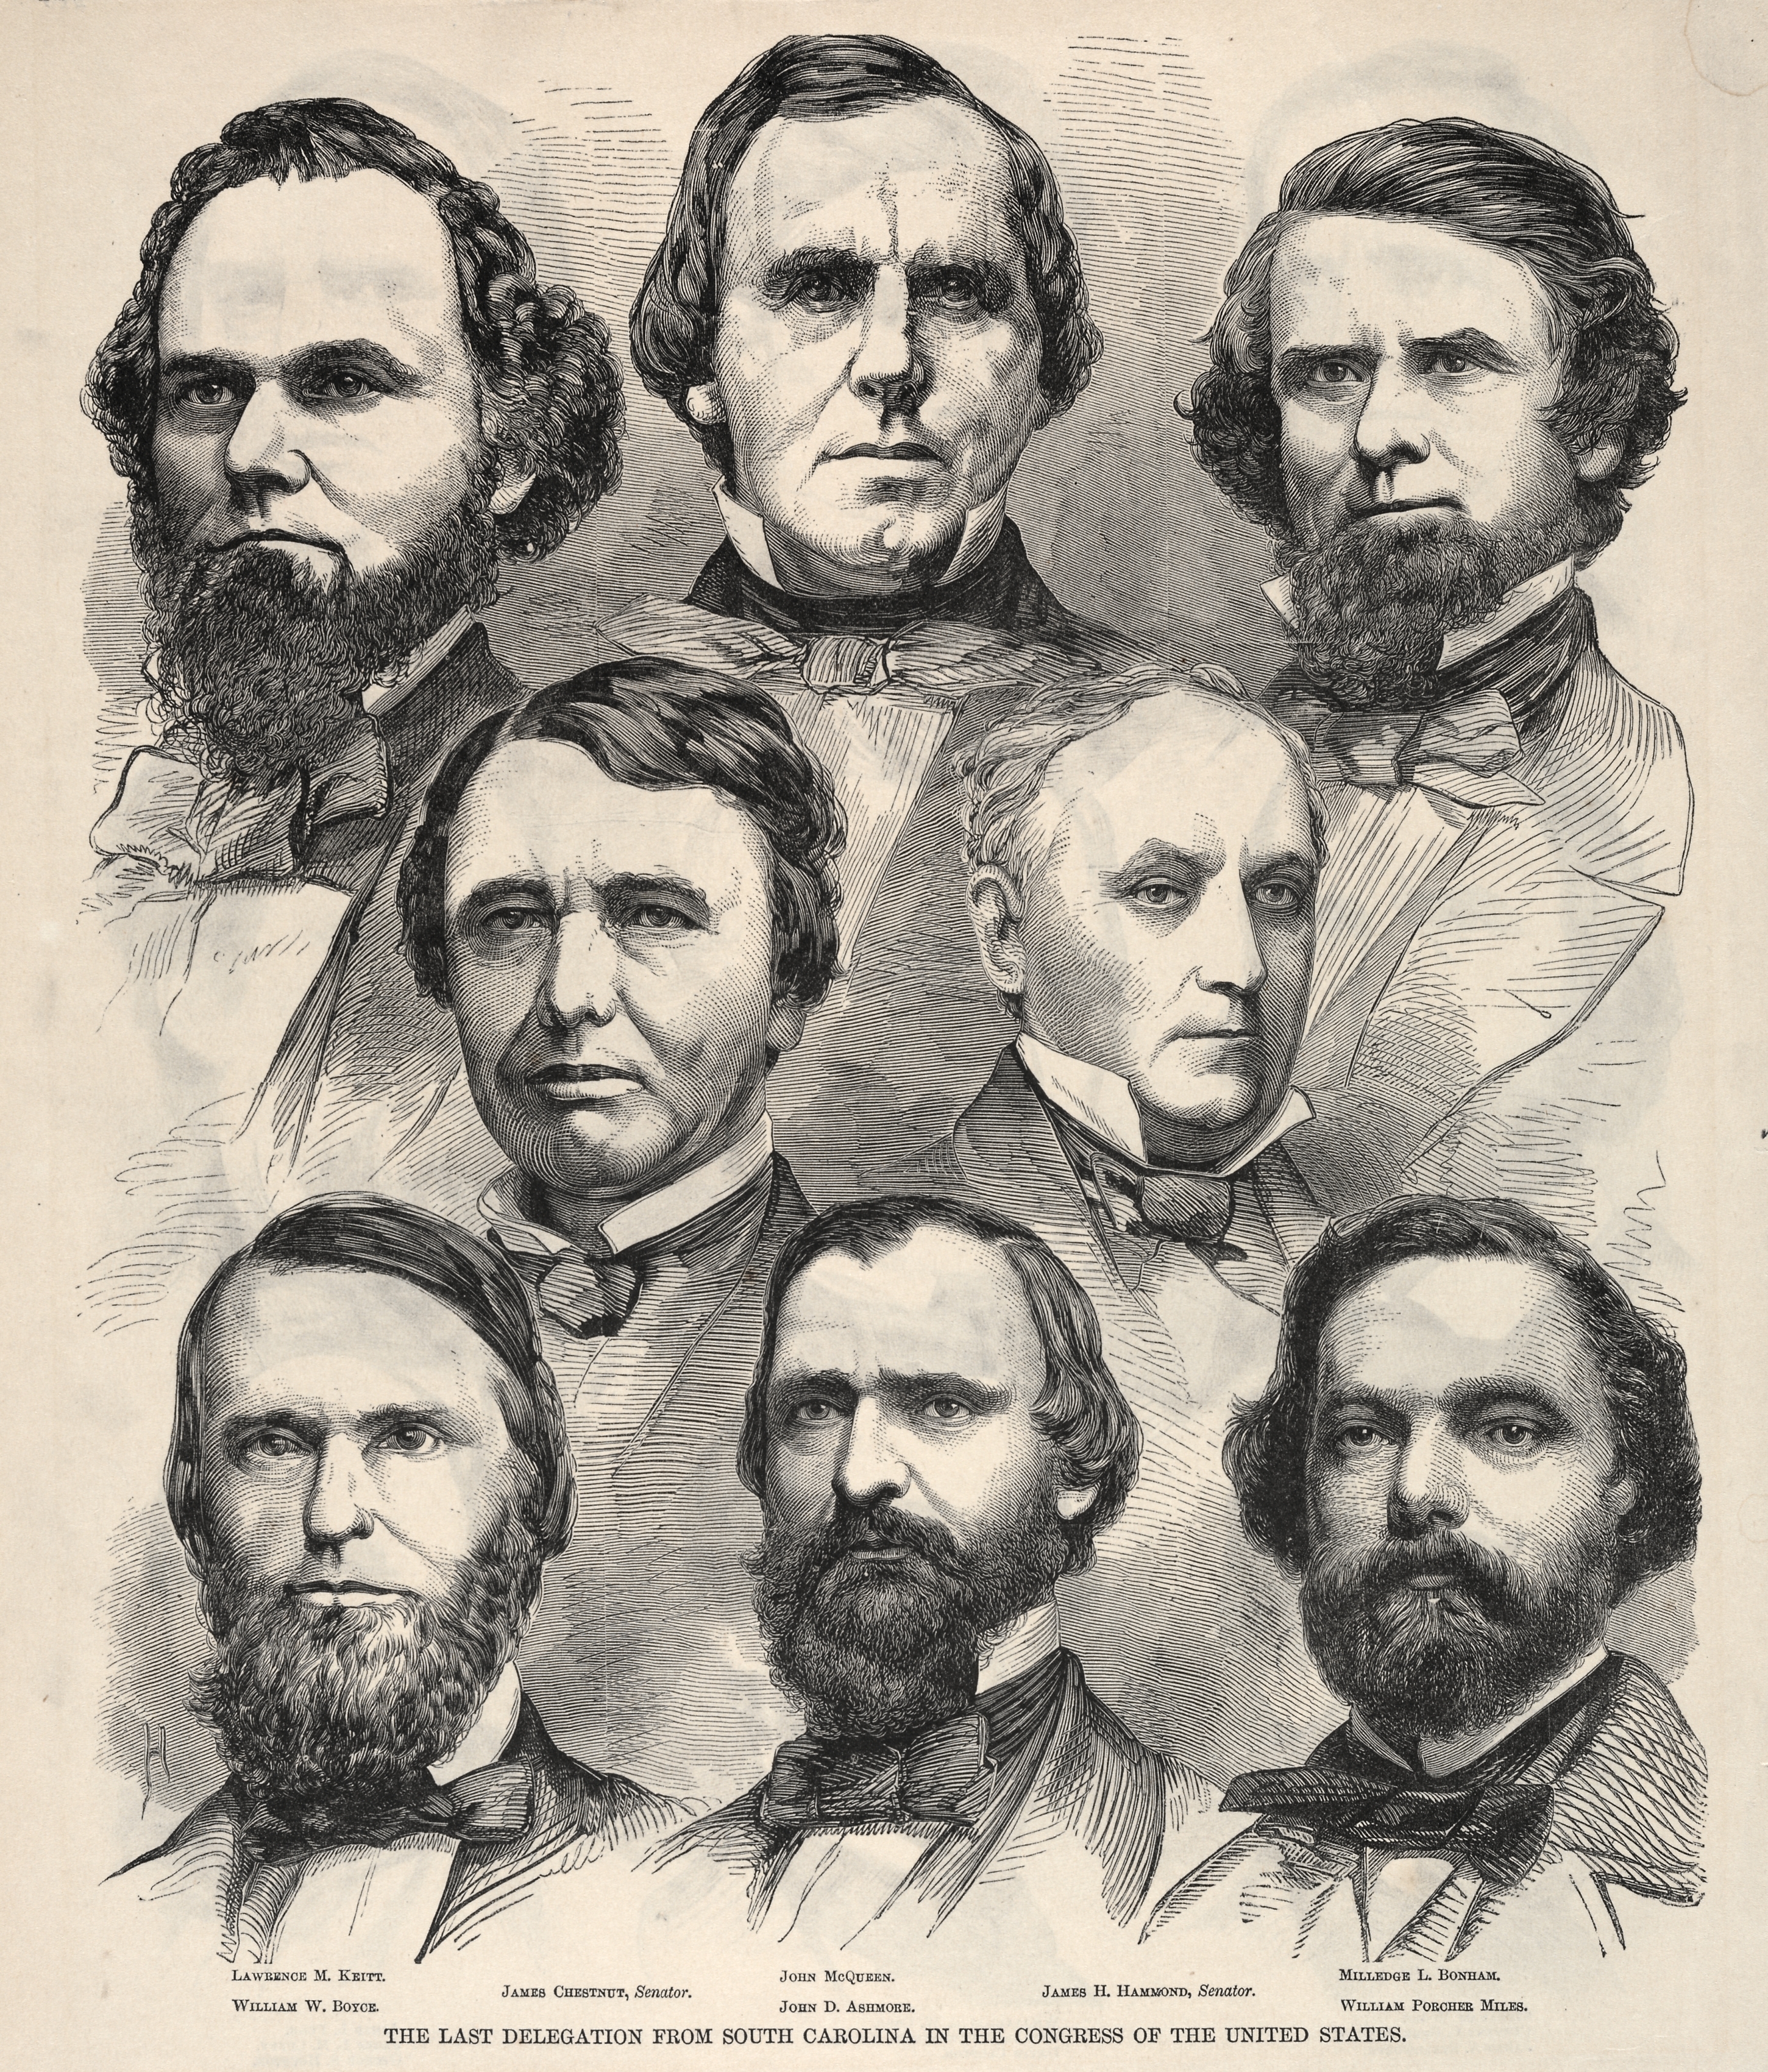 The Last Delegation from South Carolina in the Congress of the United States